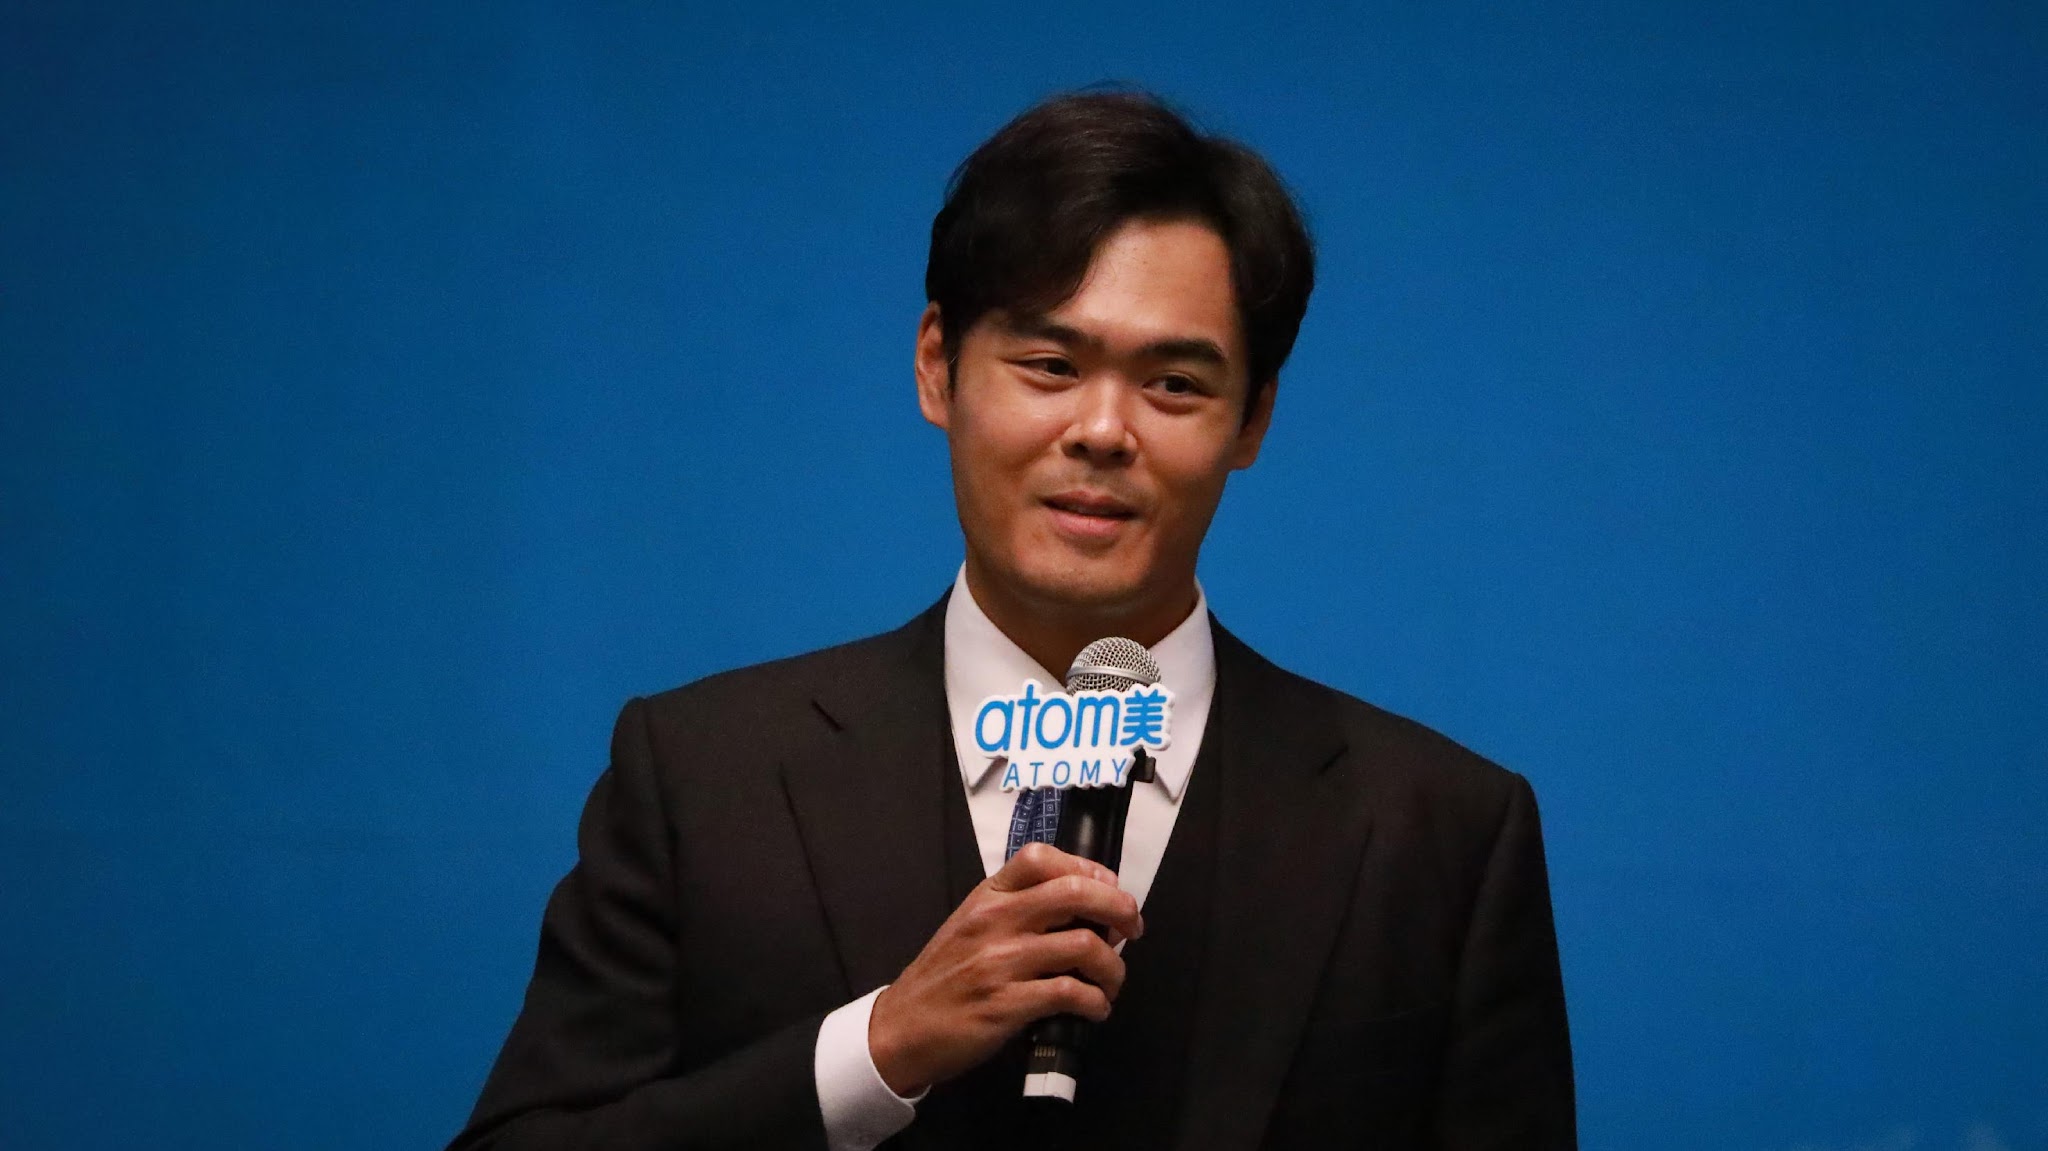 A person in a suit holding a microphone

Description automatically generated